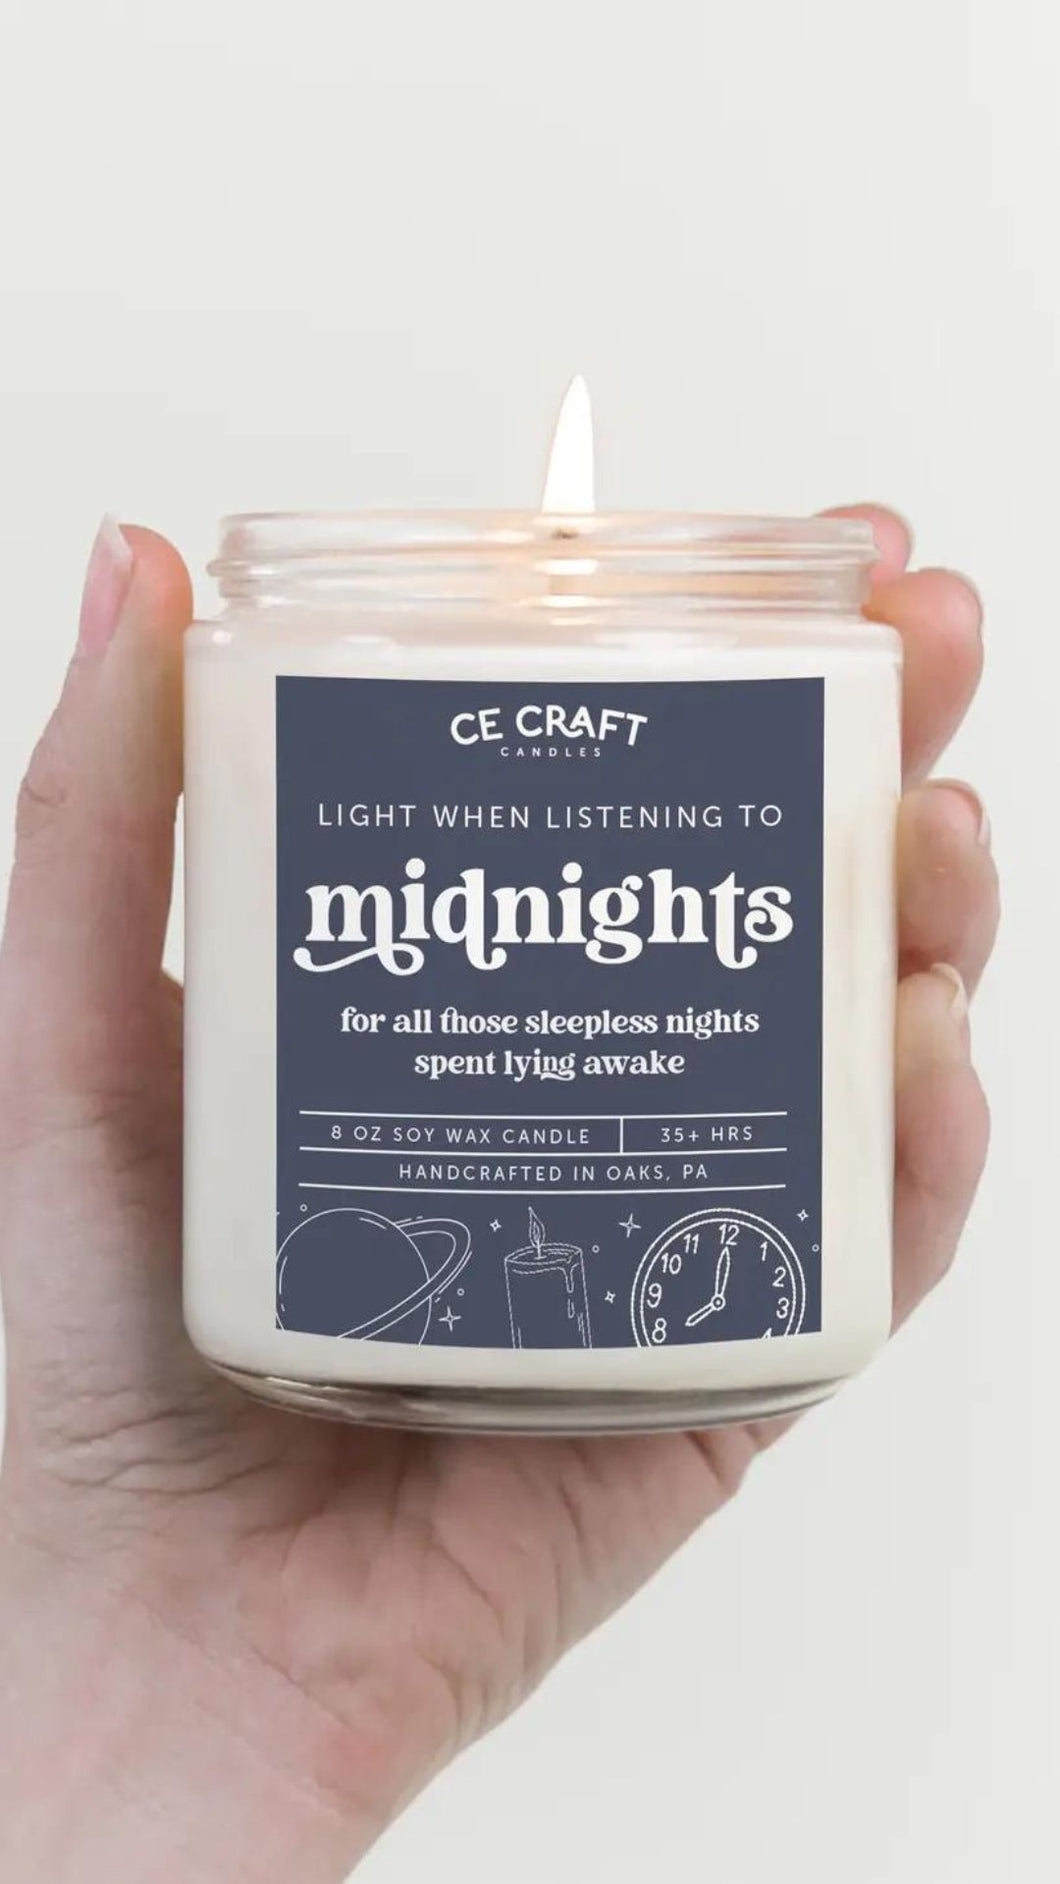 Light When Listening to Midnights Candle